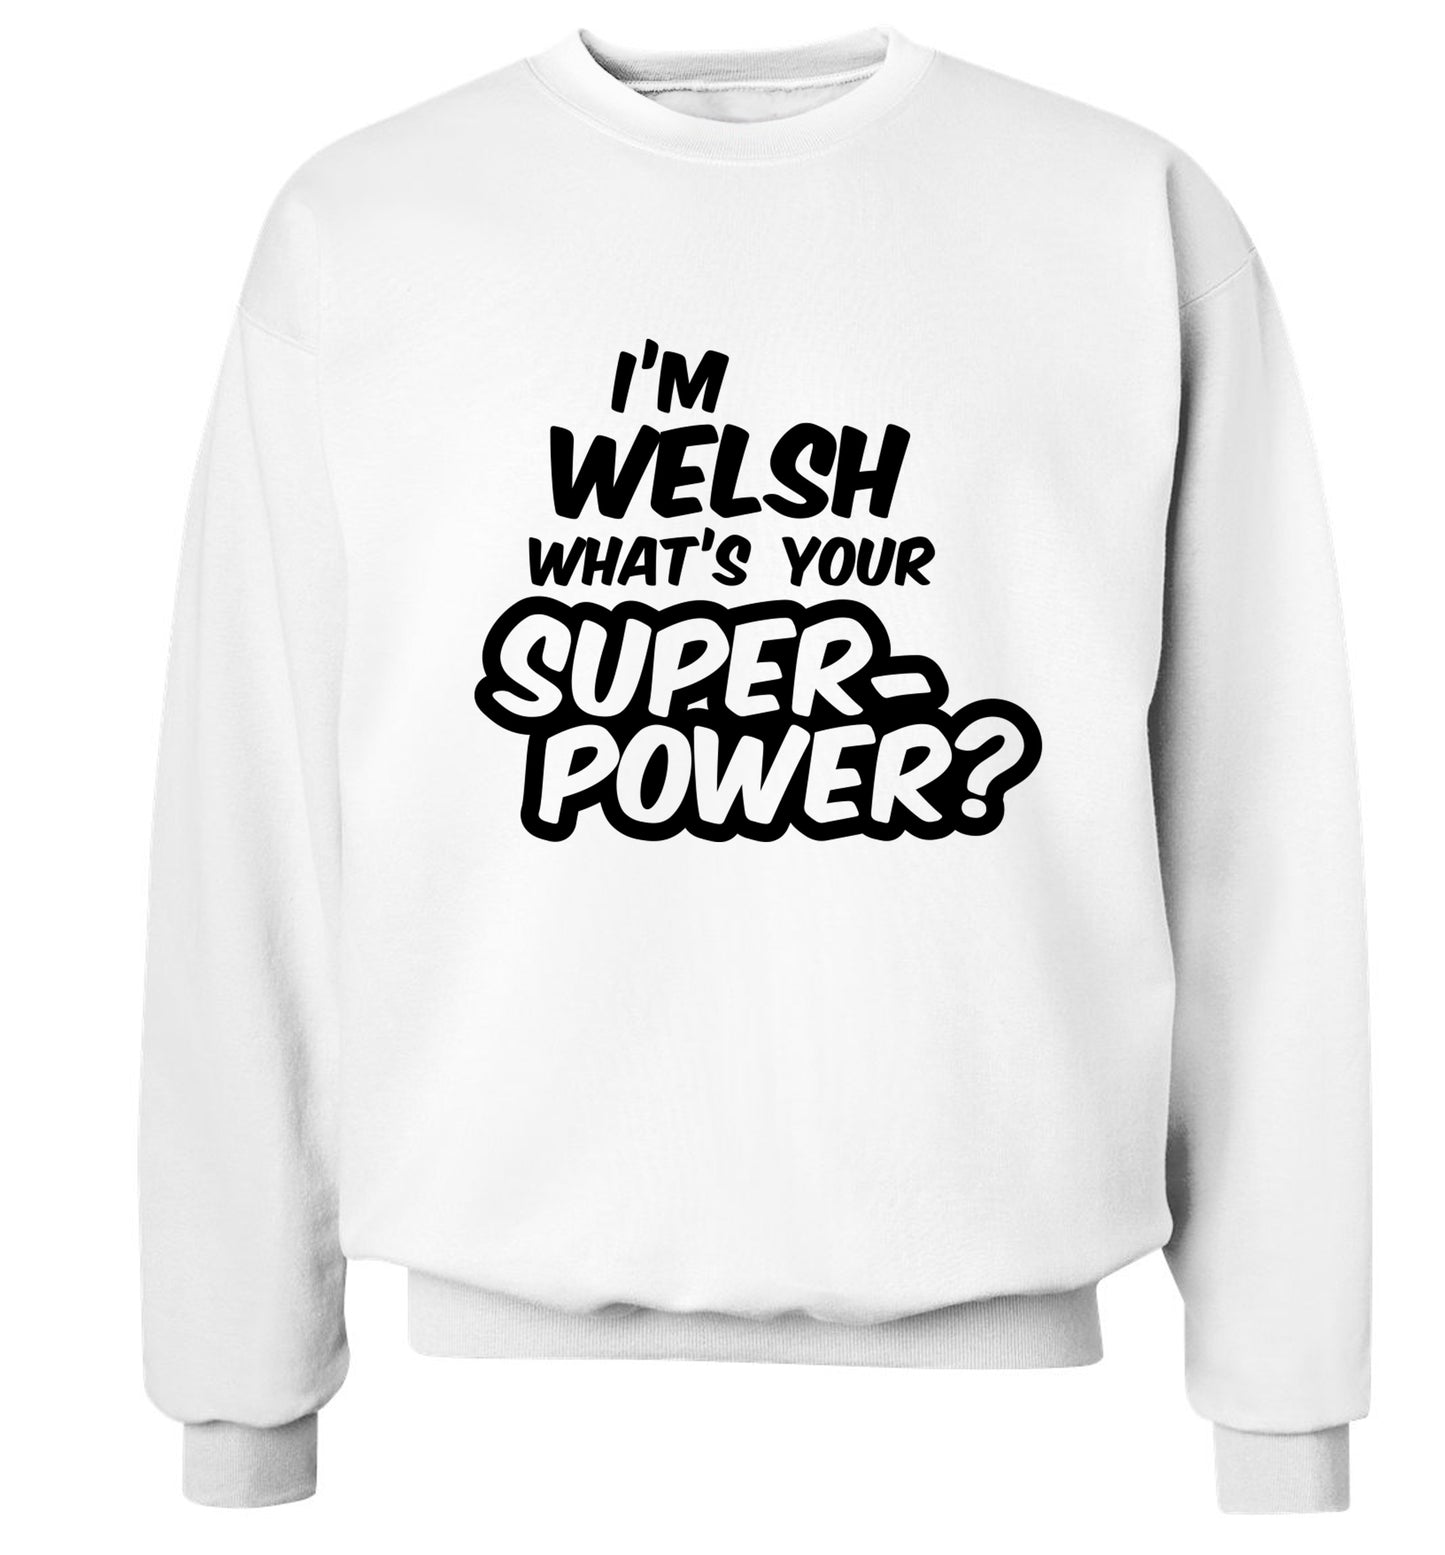 I'm Welsh what's your superpower? Adult's unisex white Sweater 2XL